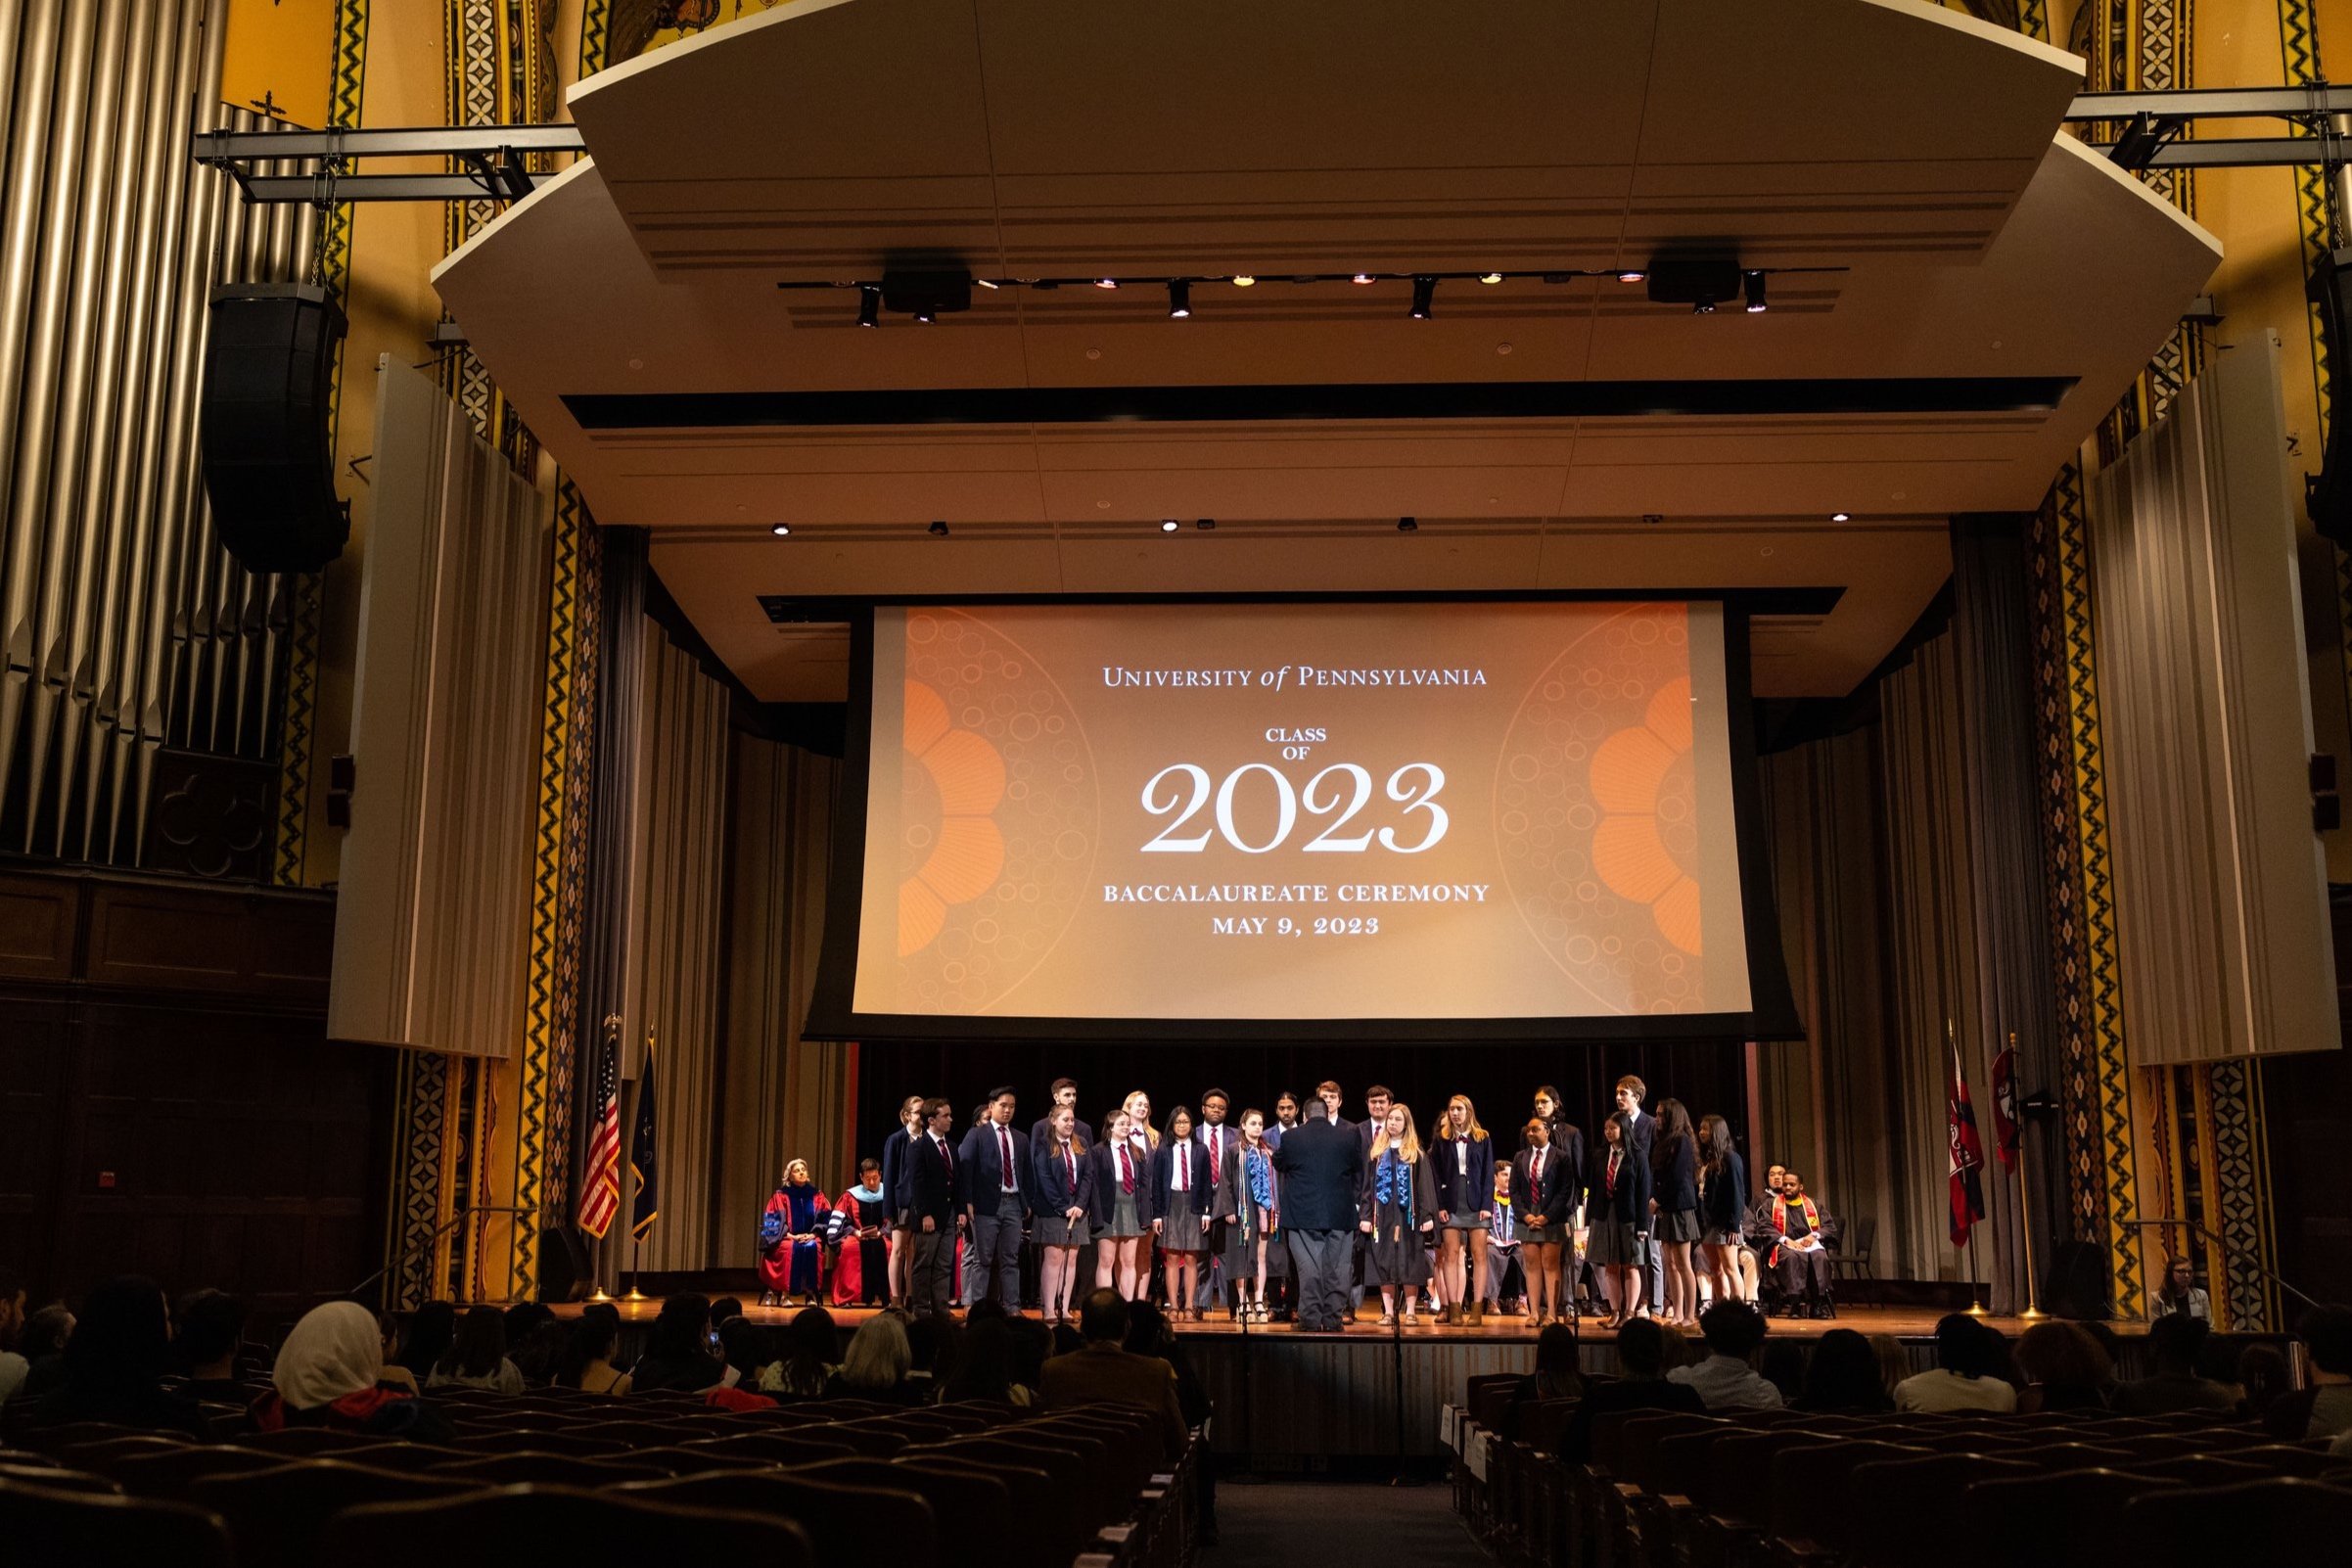 The Penn Glee Club performing at the 2023 Baccalaureate Ceremony.